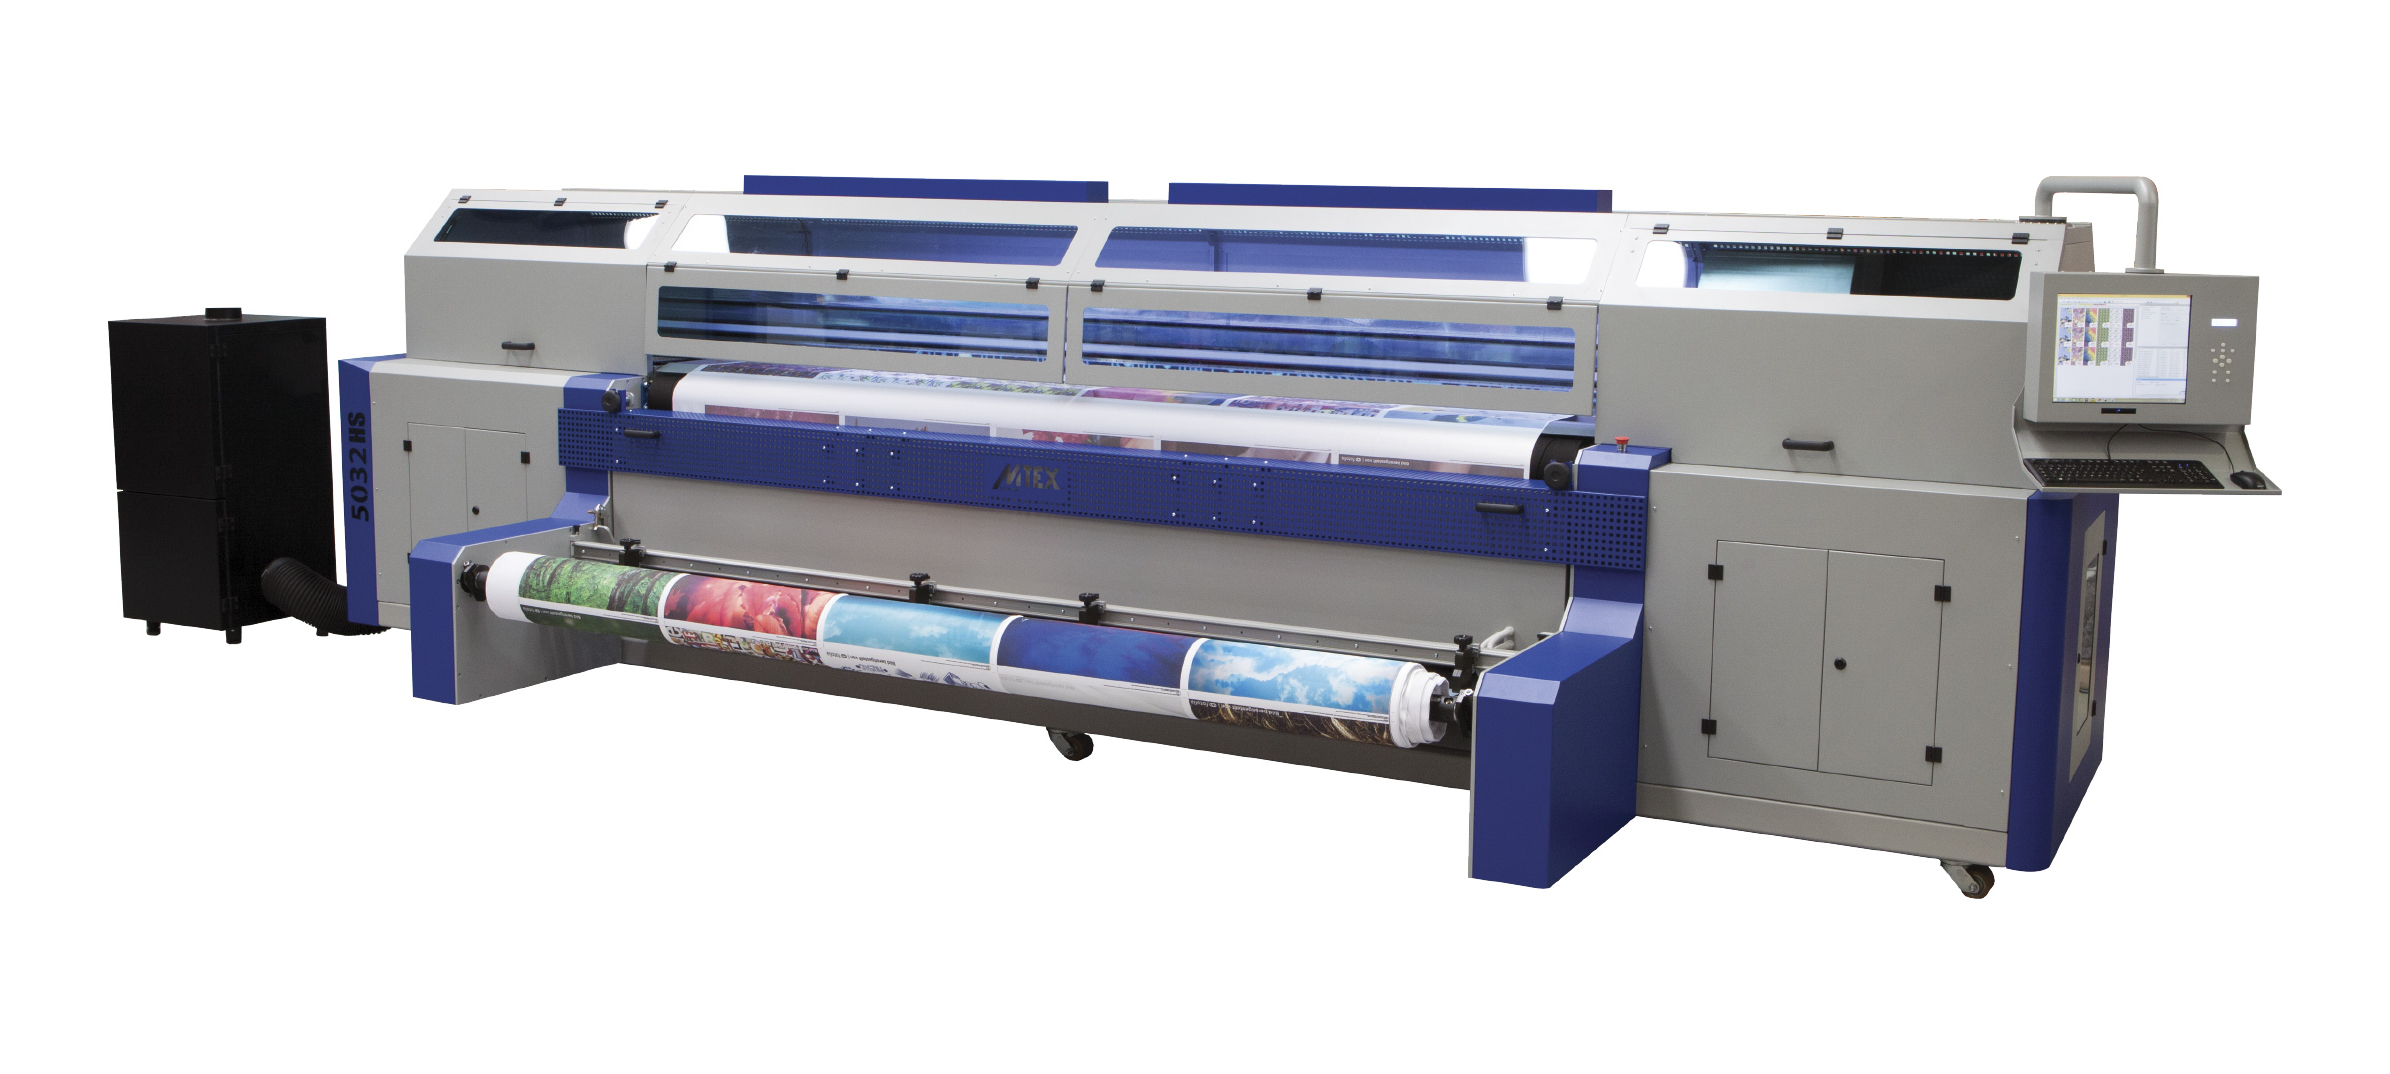 The high speed version of the MTEX5032 printer was launched during 2015. © MTEX 